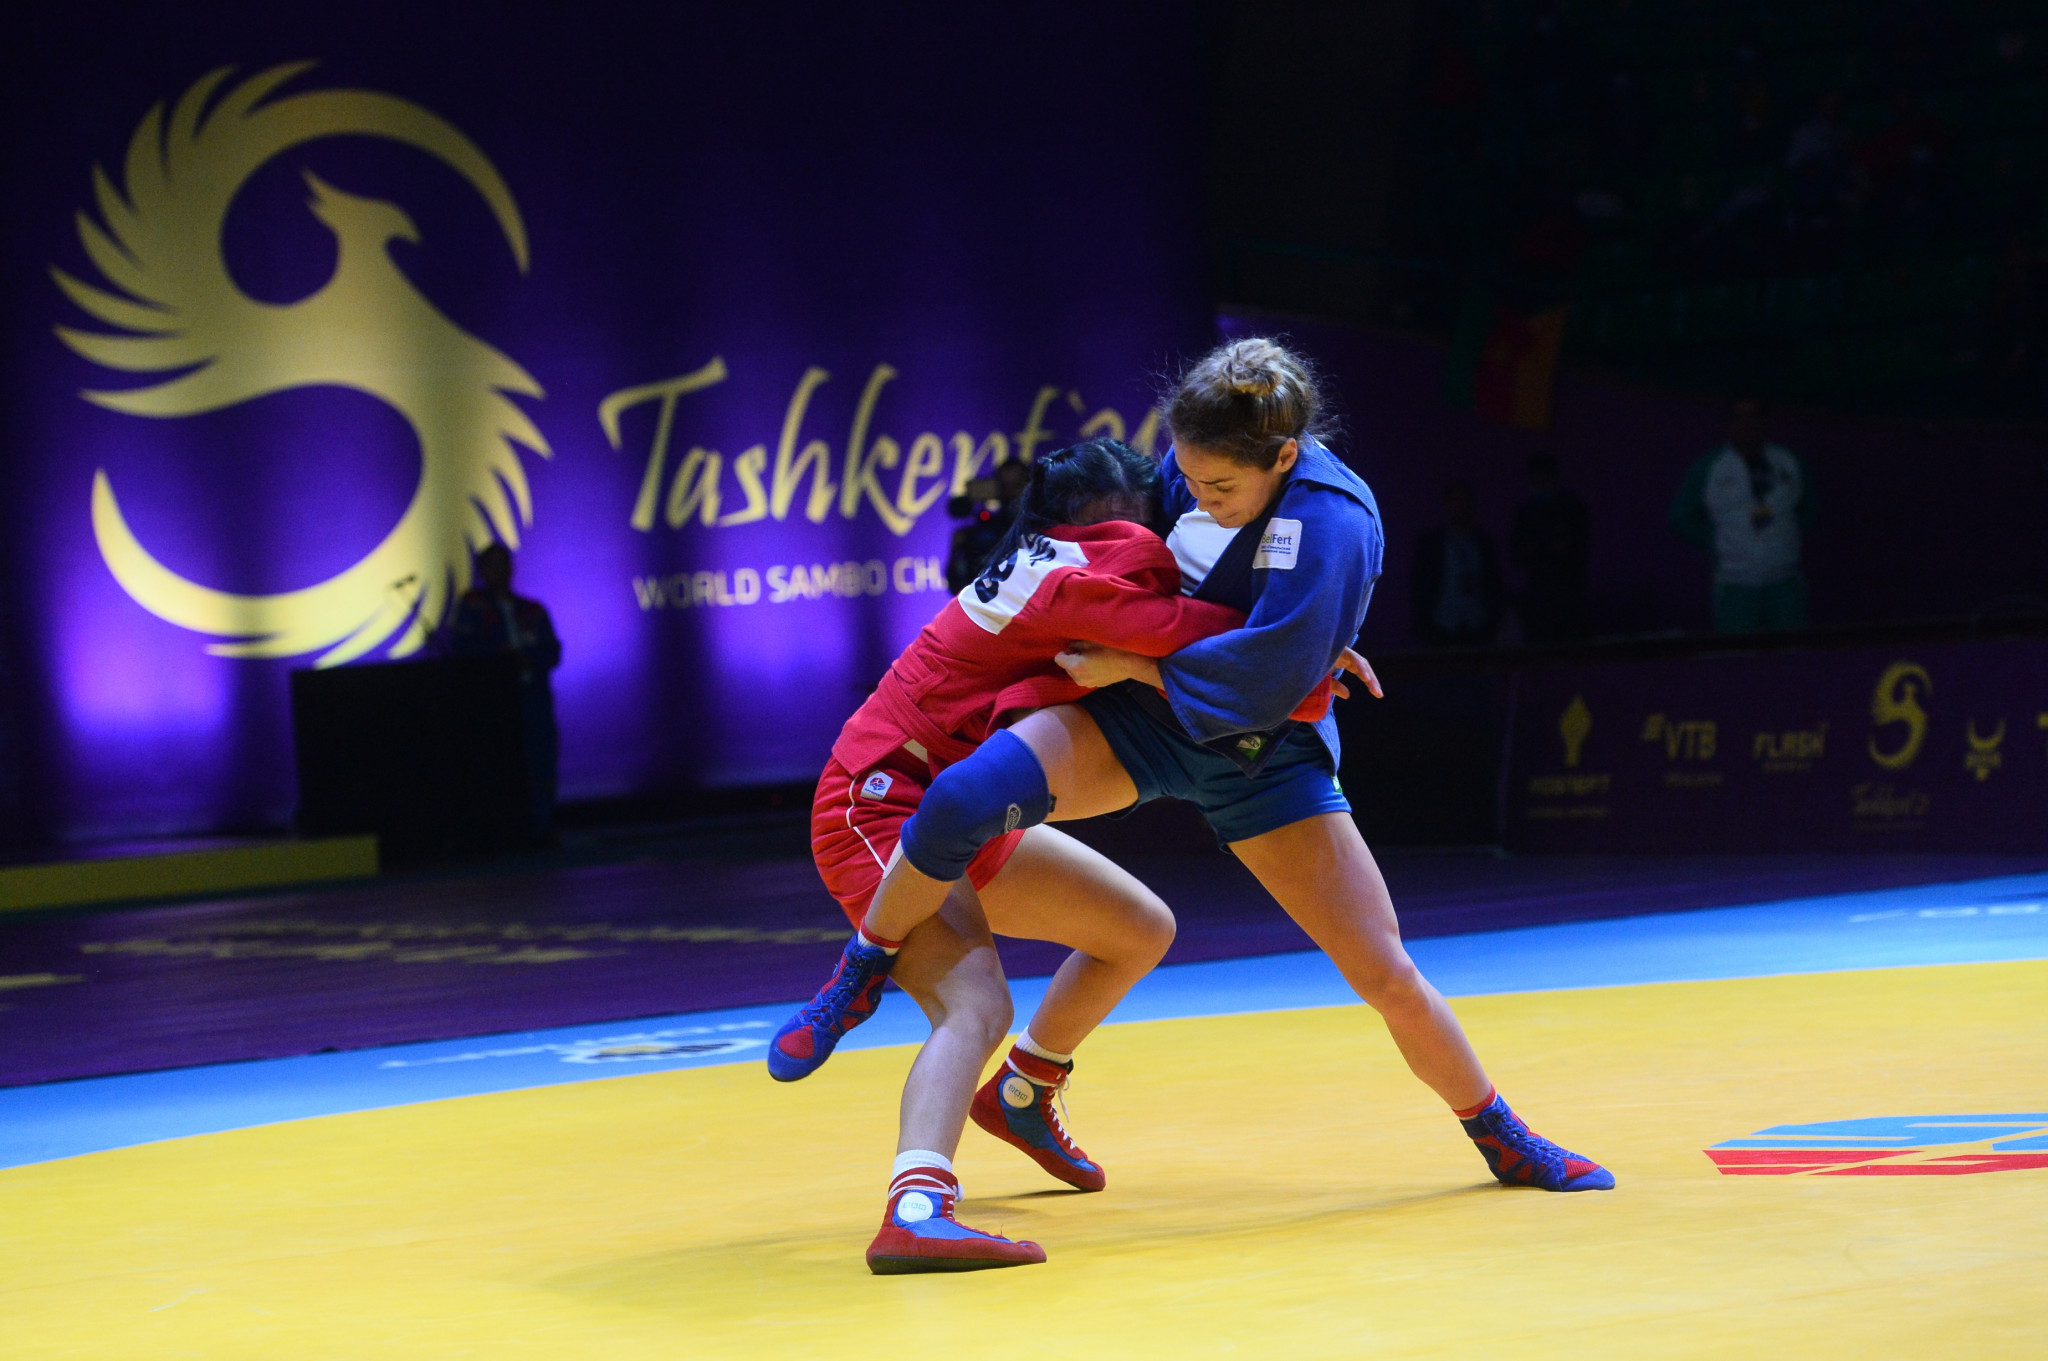 More than 340 athletes from almost 50 nations are competing at the World Sambo Championships ©FIAS